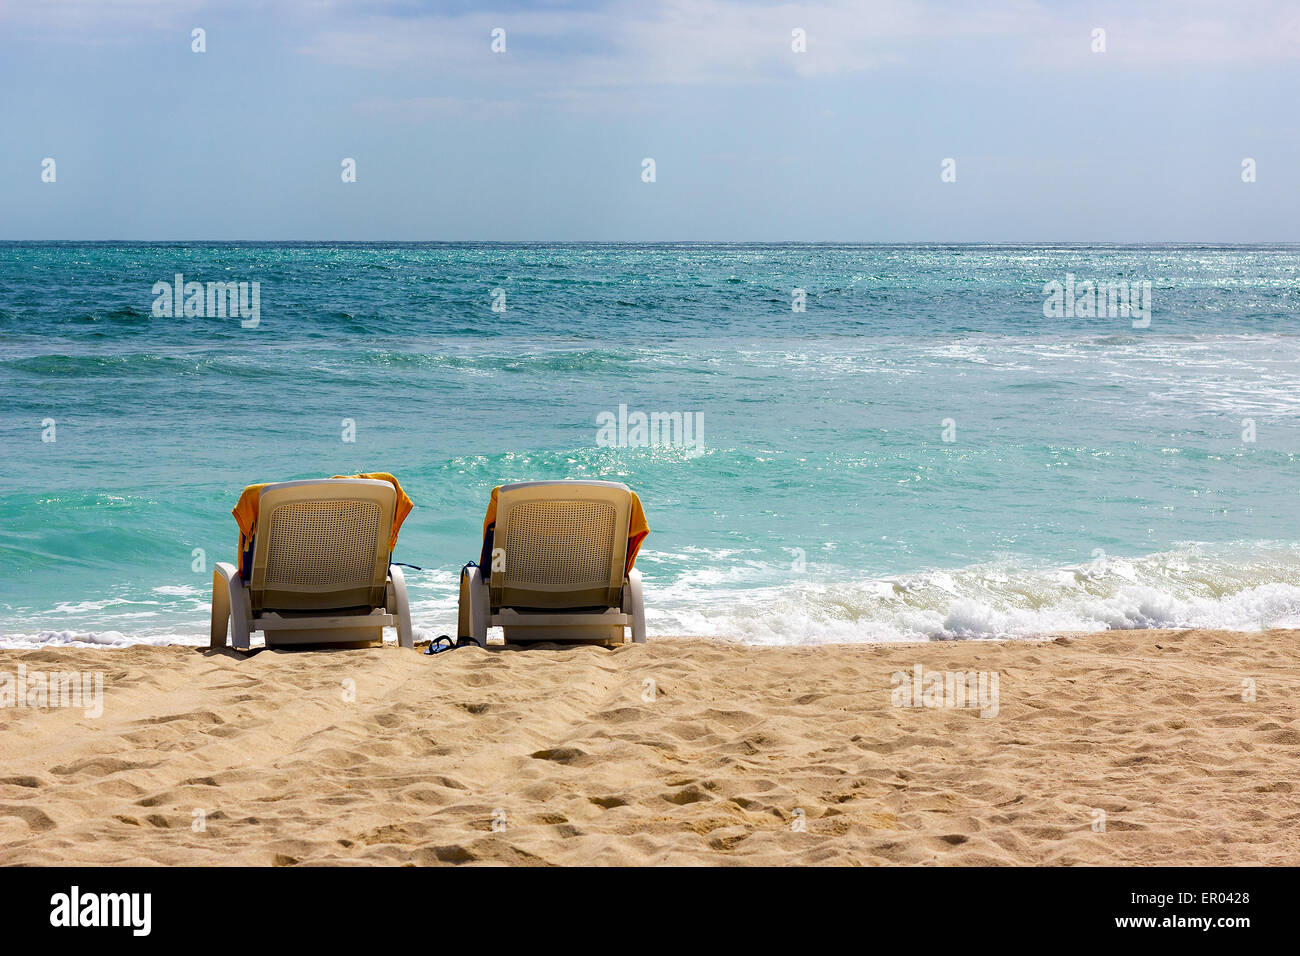 Lonely chairs on the ocean beach. Stock Photo